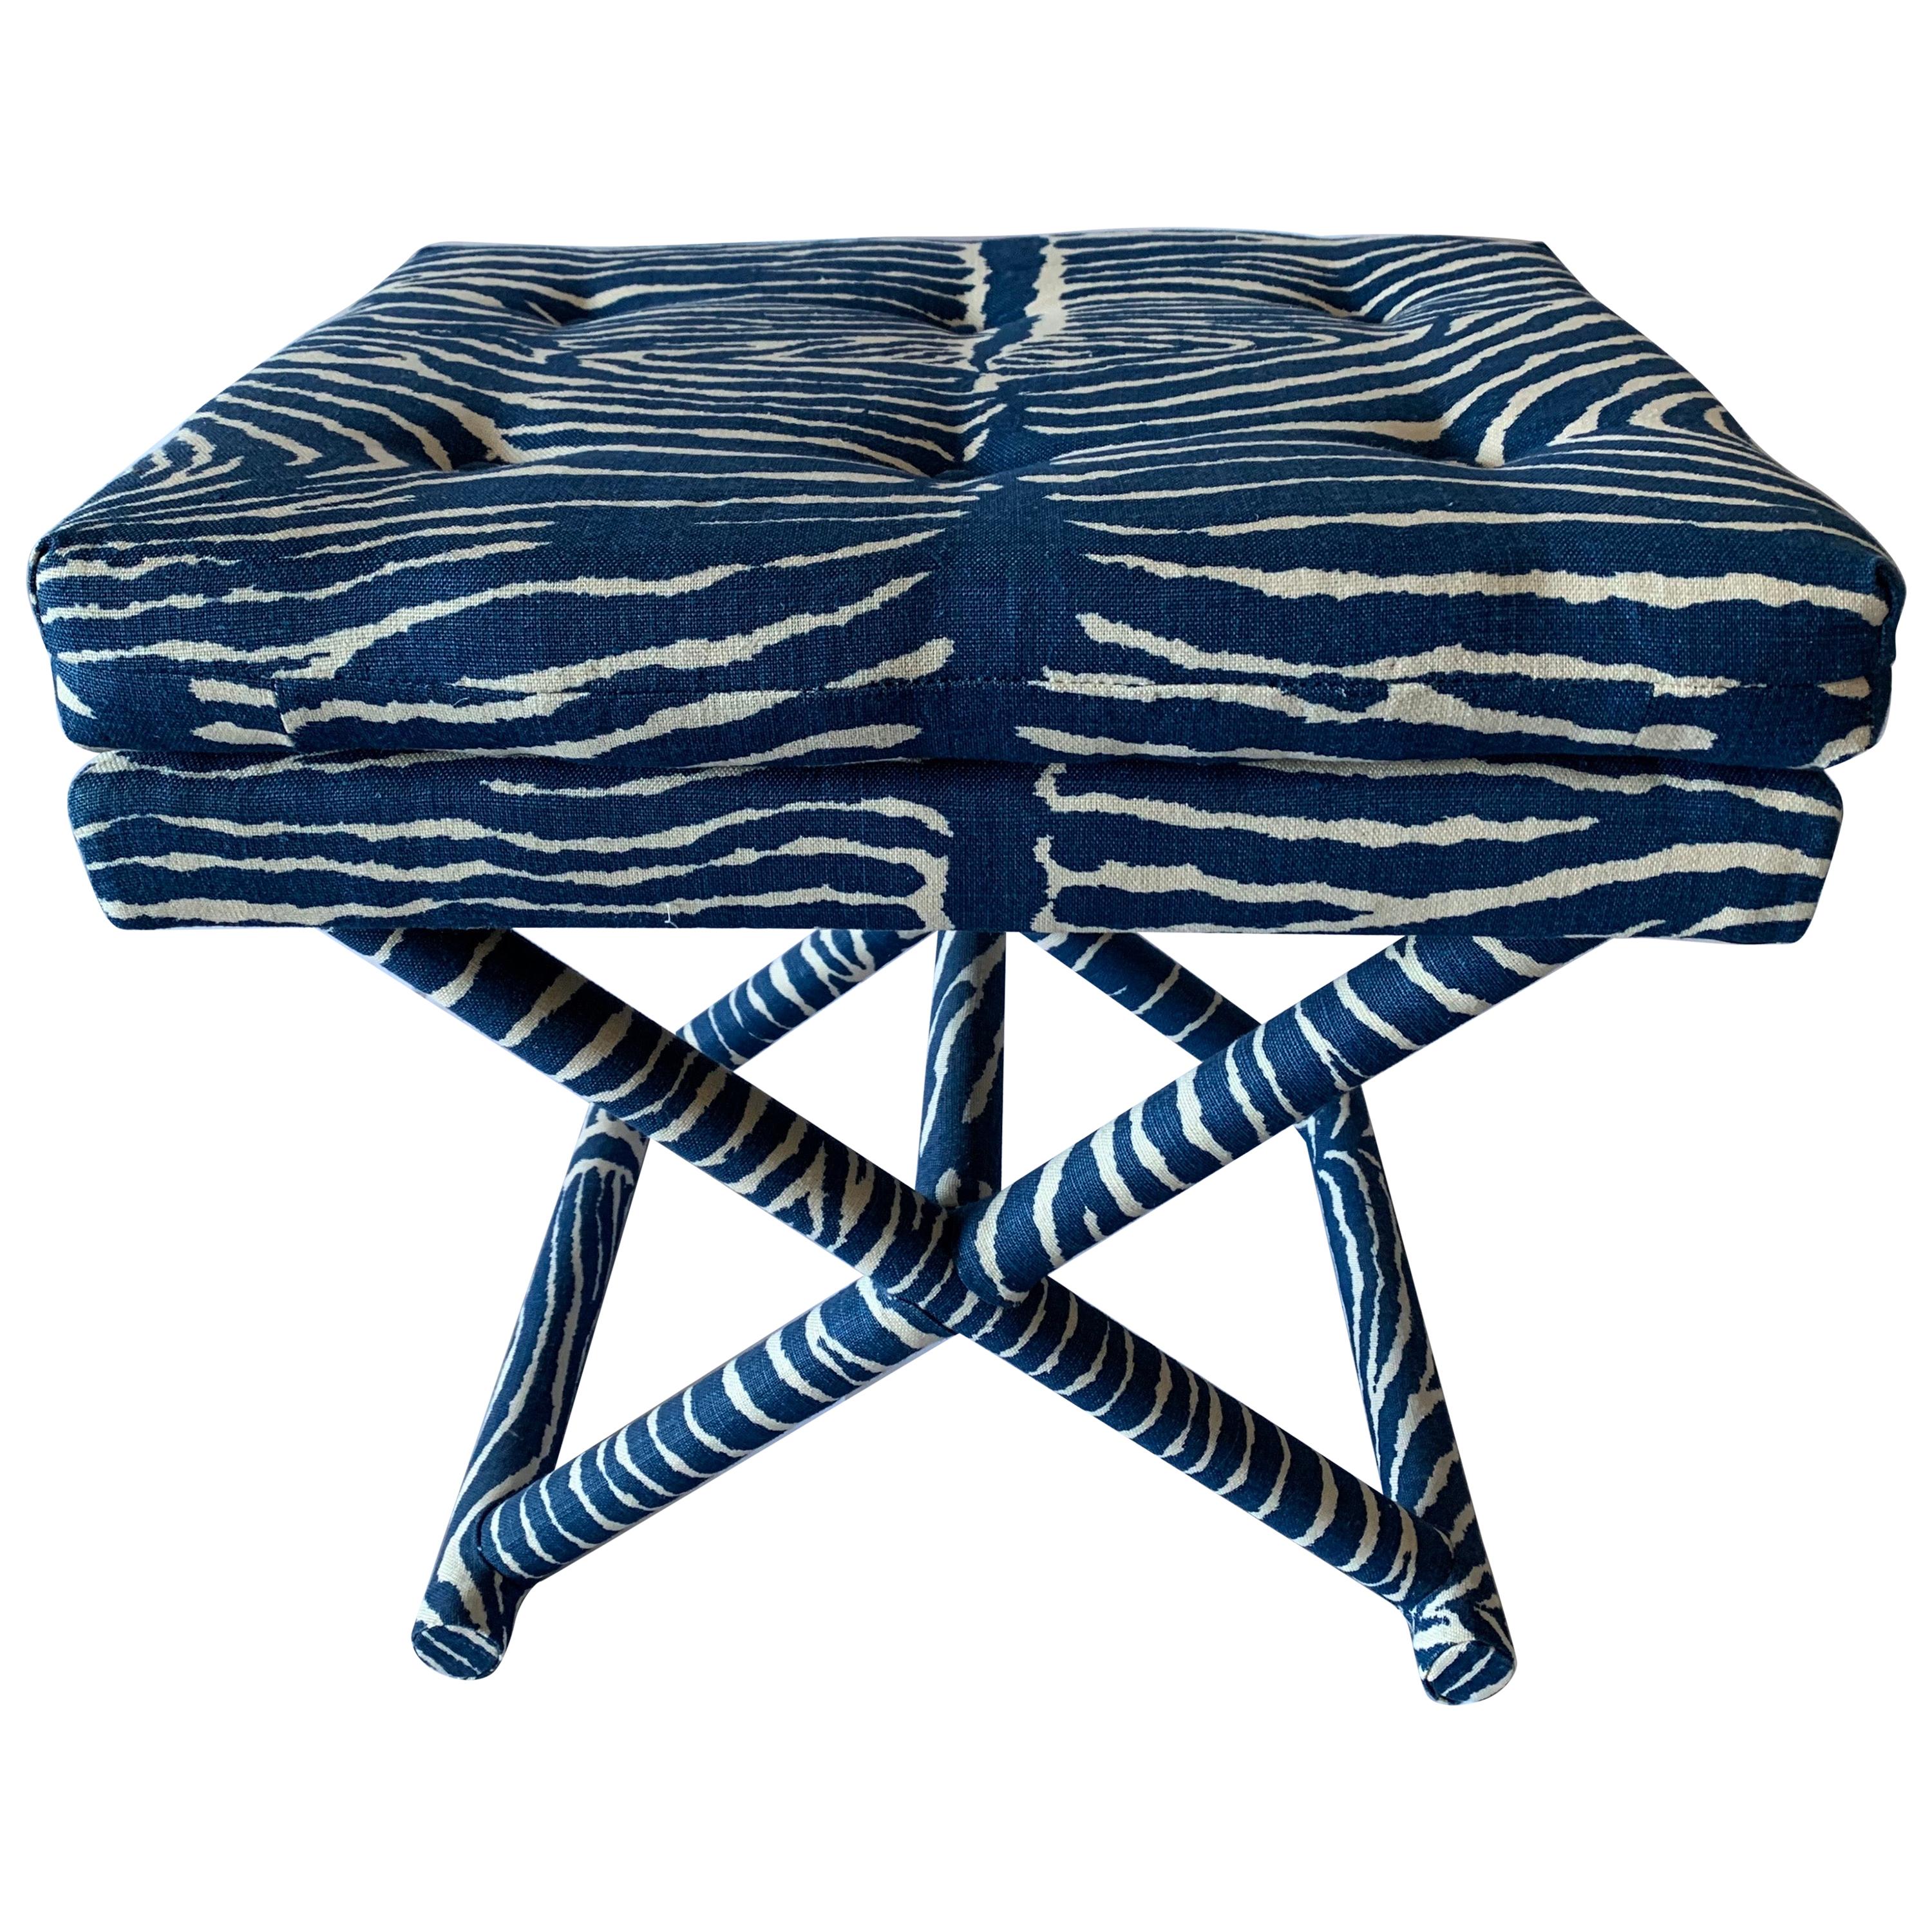 1970s X-Bench Newly Upholstered in Blue Le Zebre Fabric 